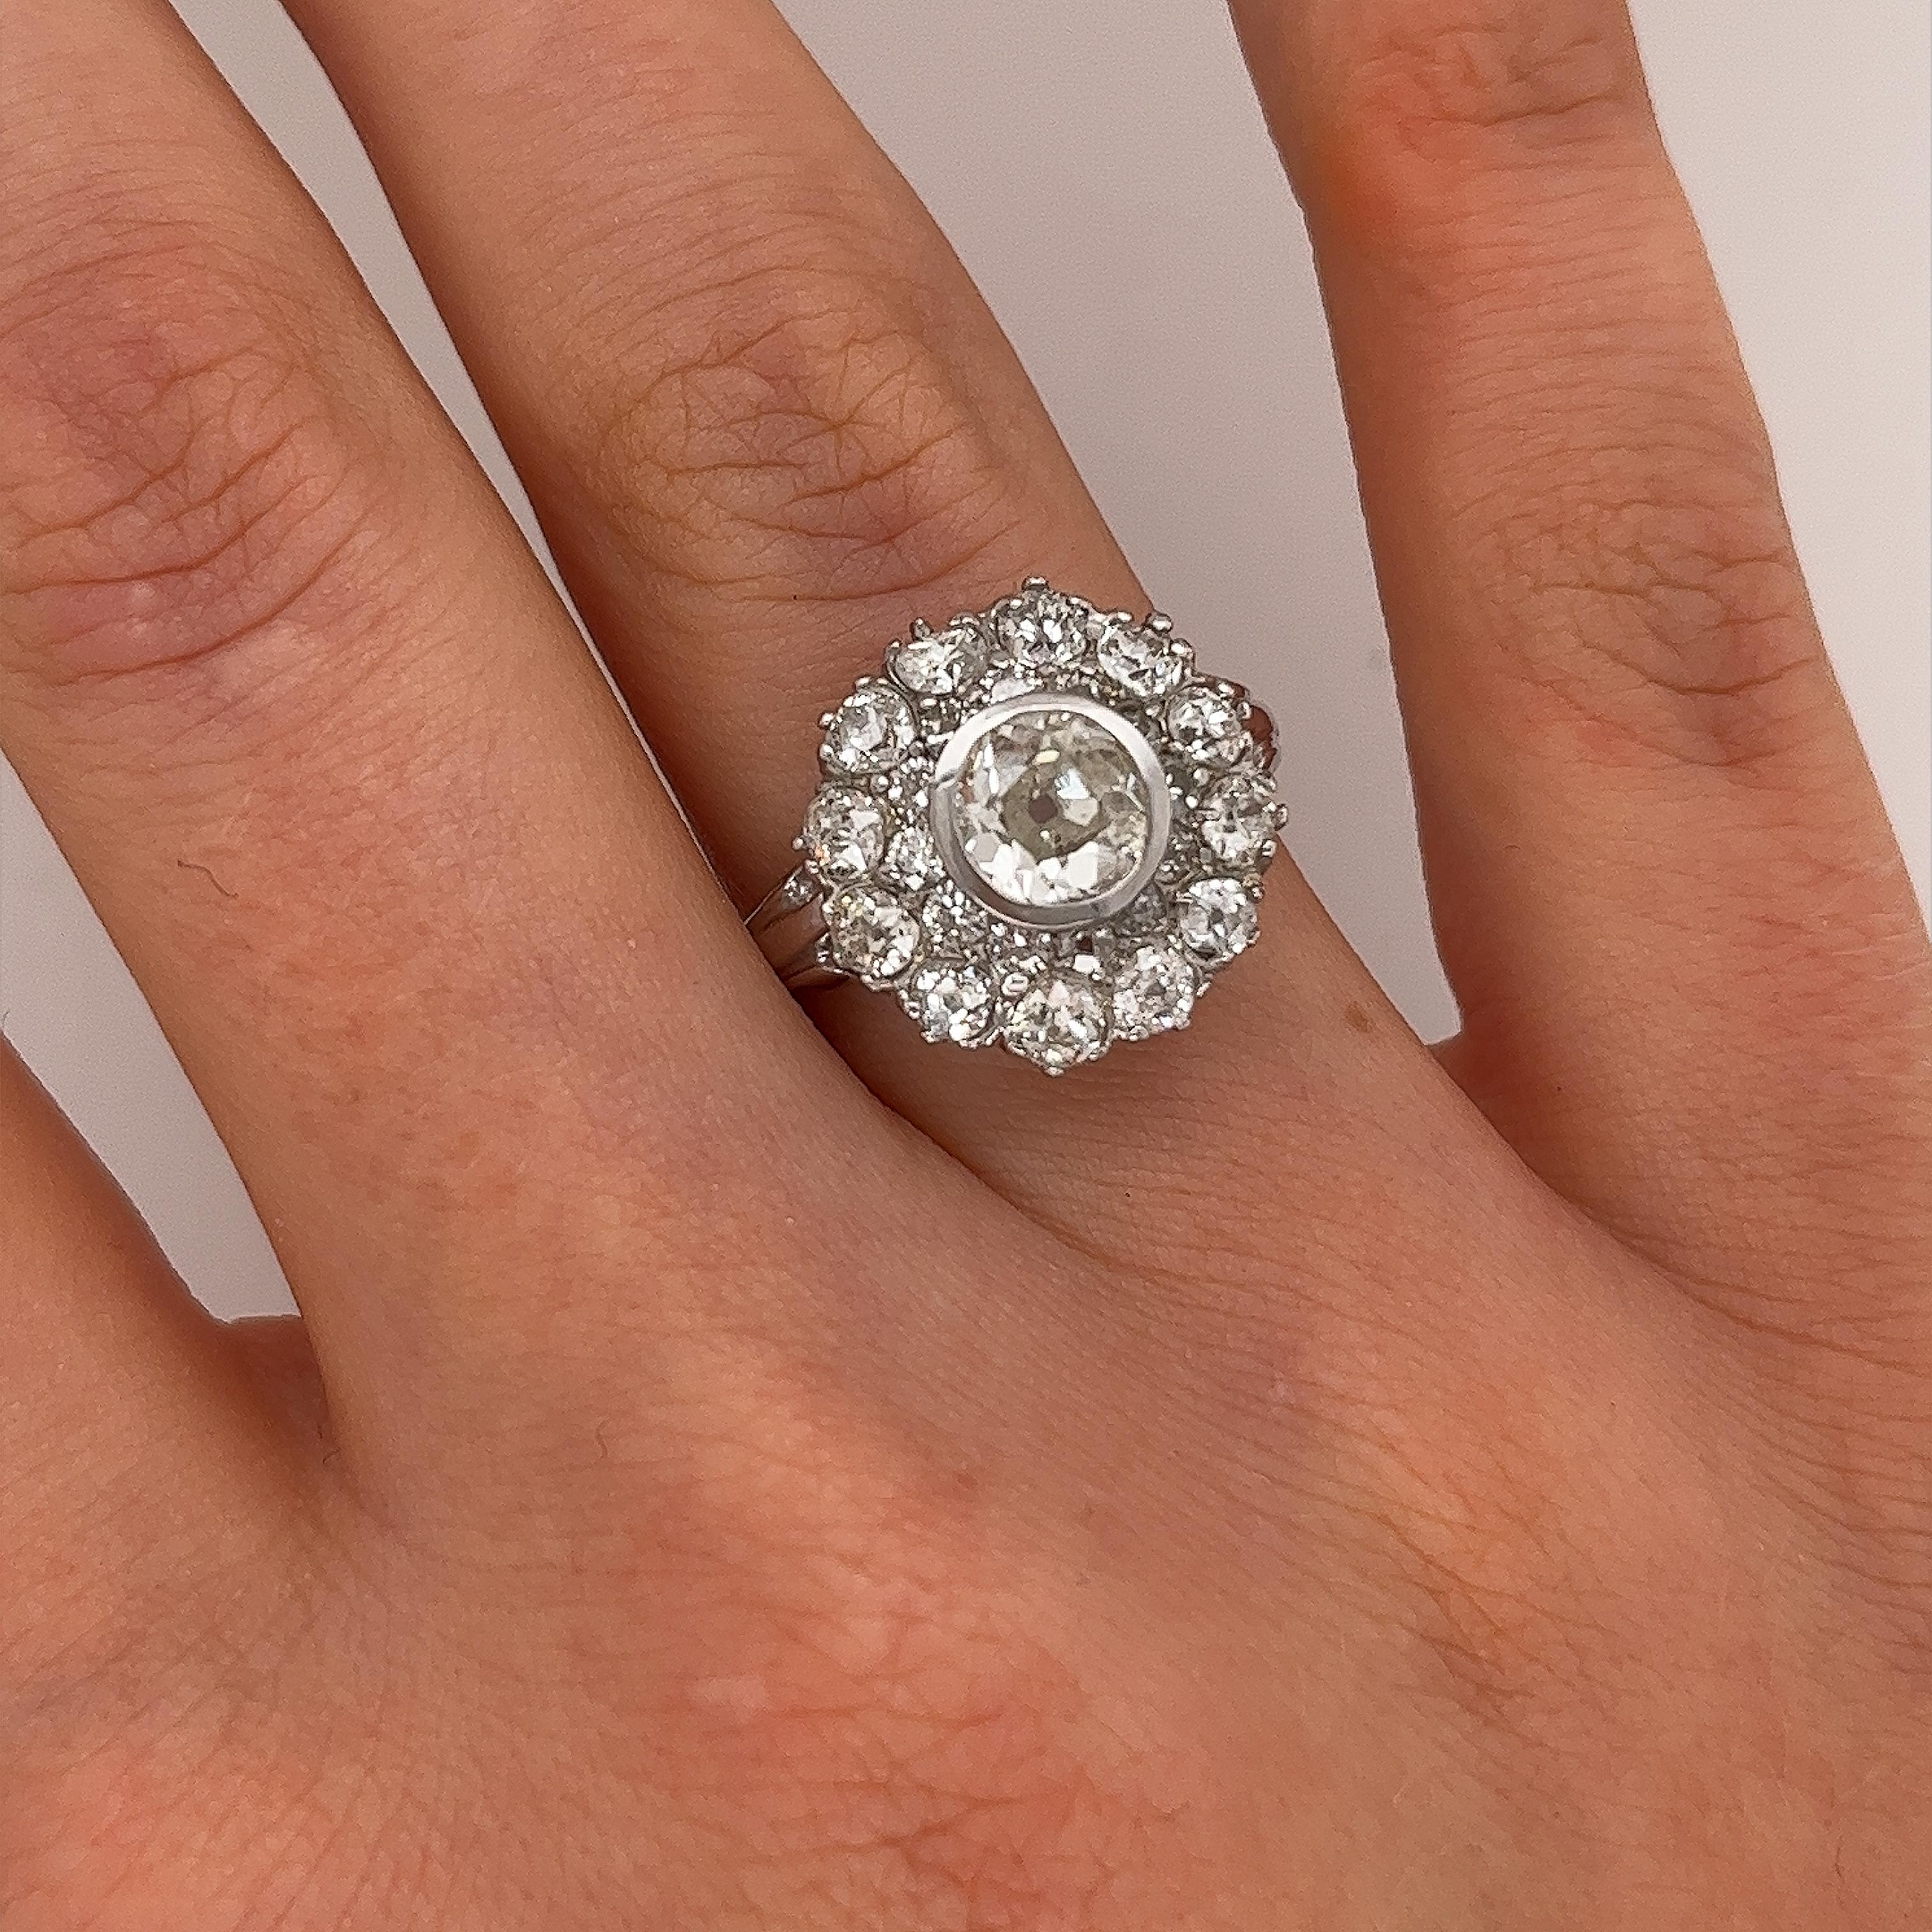 Vintage Italian Made Diamond Cluster Ring, Set With 2.37ct Victorian Diamonds For Sale 1